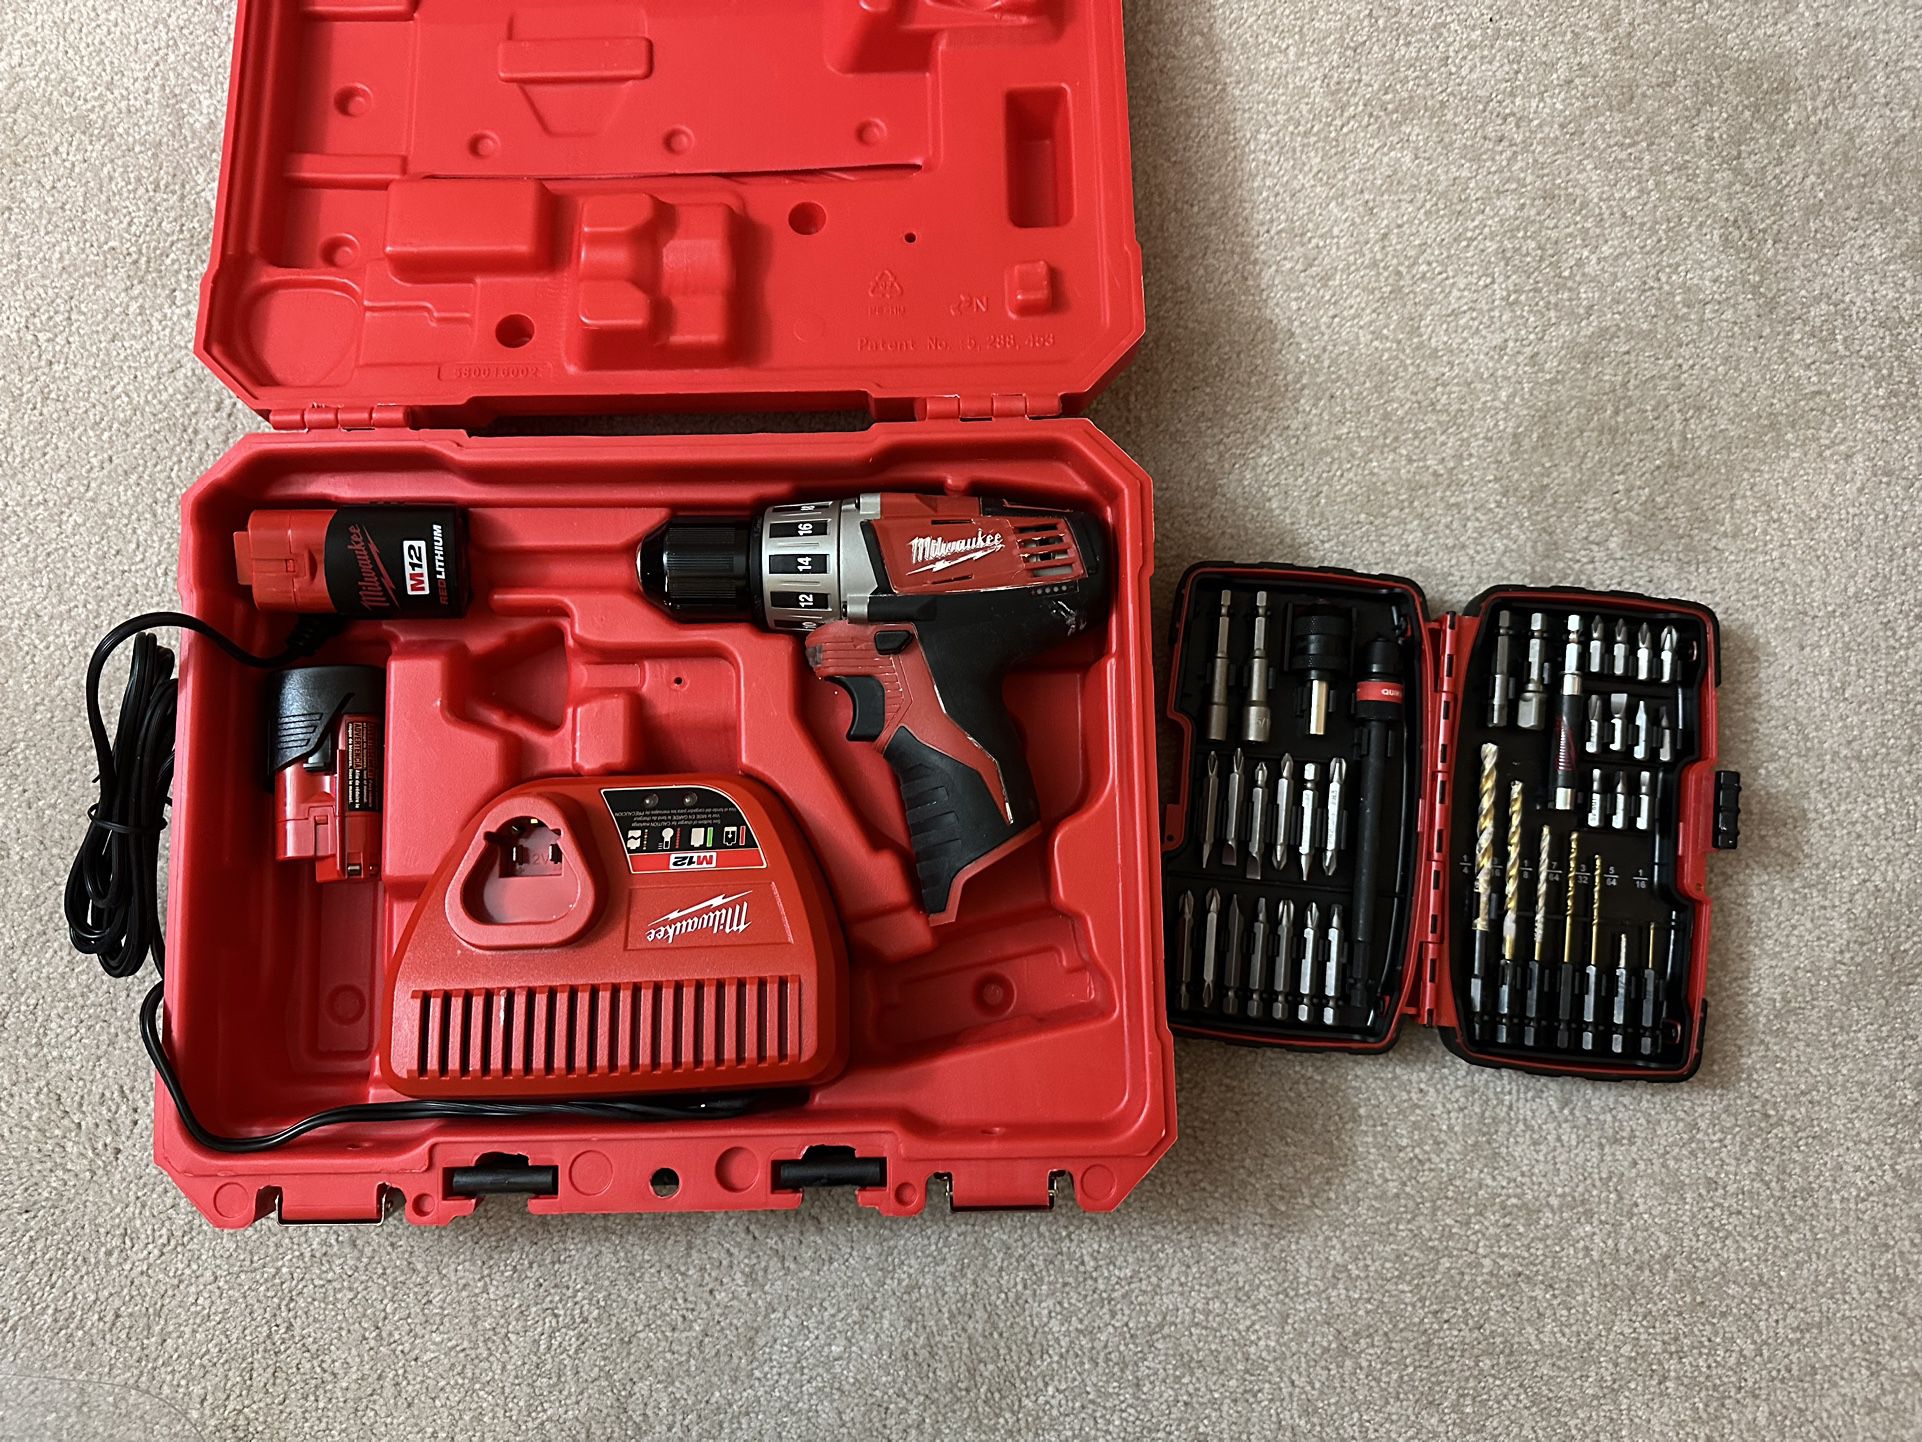 Milwaukee 12V 3/8 Inch Drill And Driver With 38 Piece Drill And Drive Bit Set